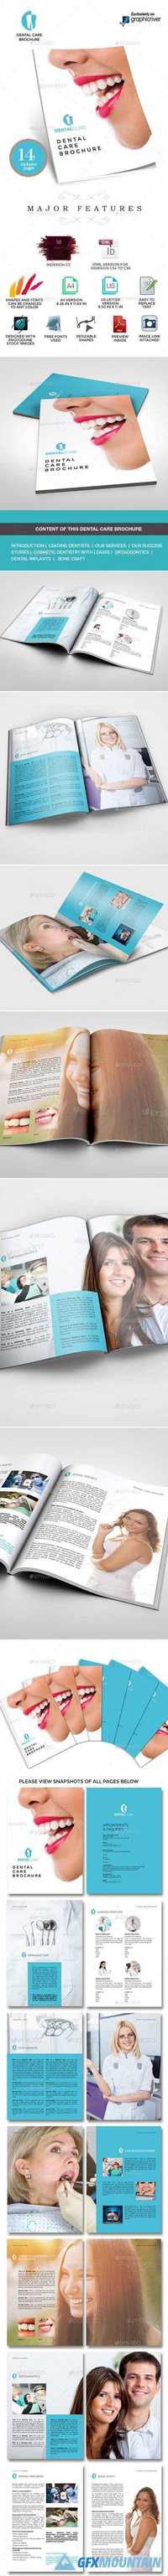 Dental Clinic Services or Care Brochure 9529058